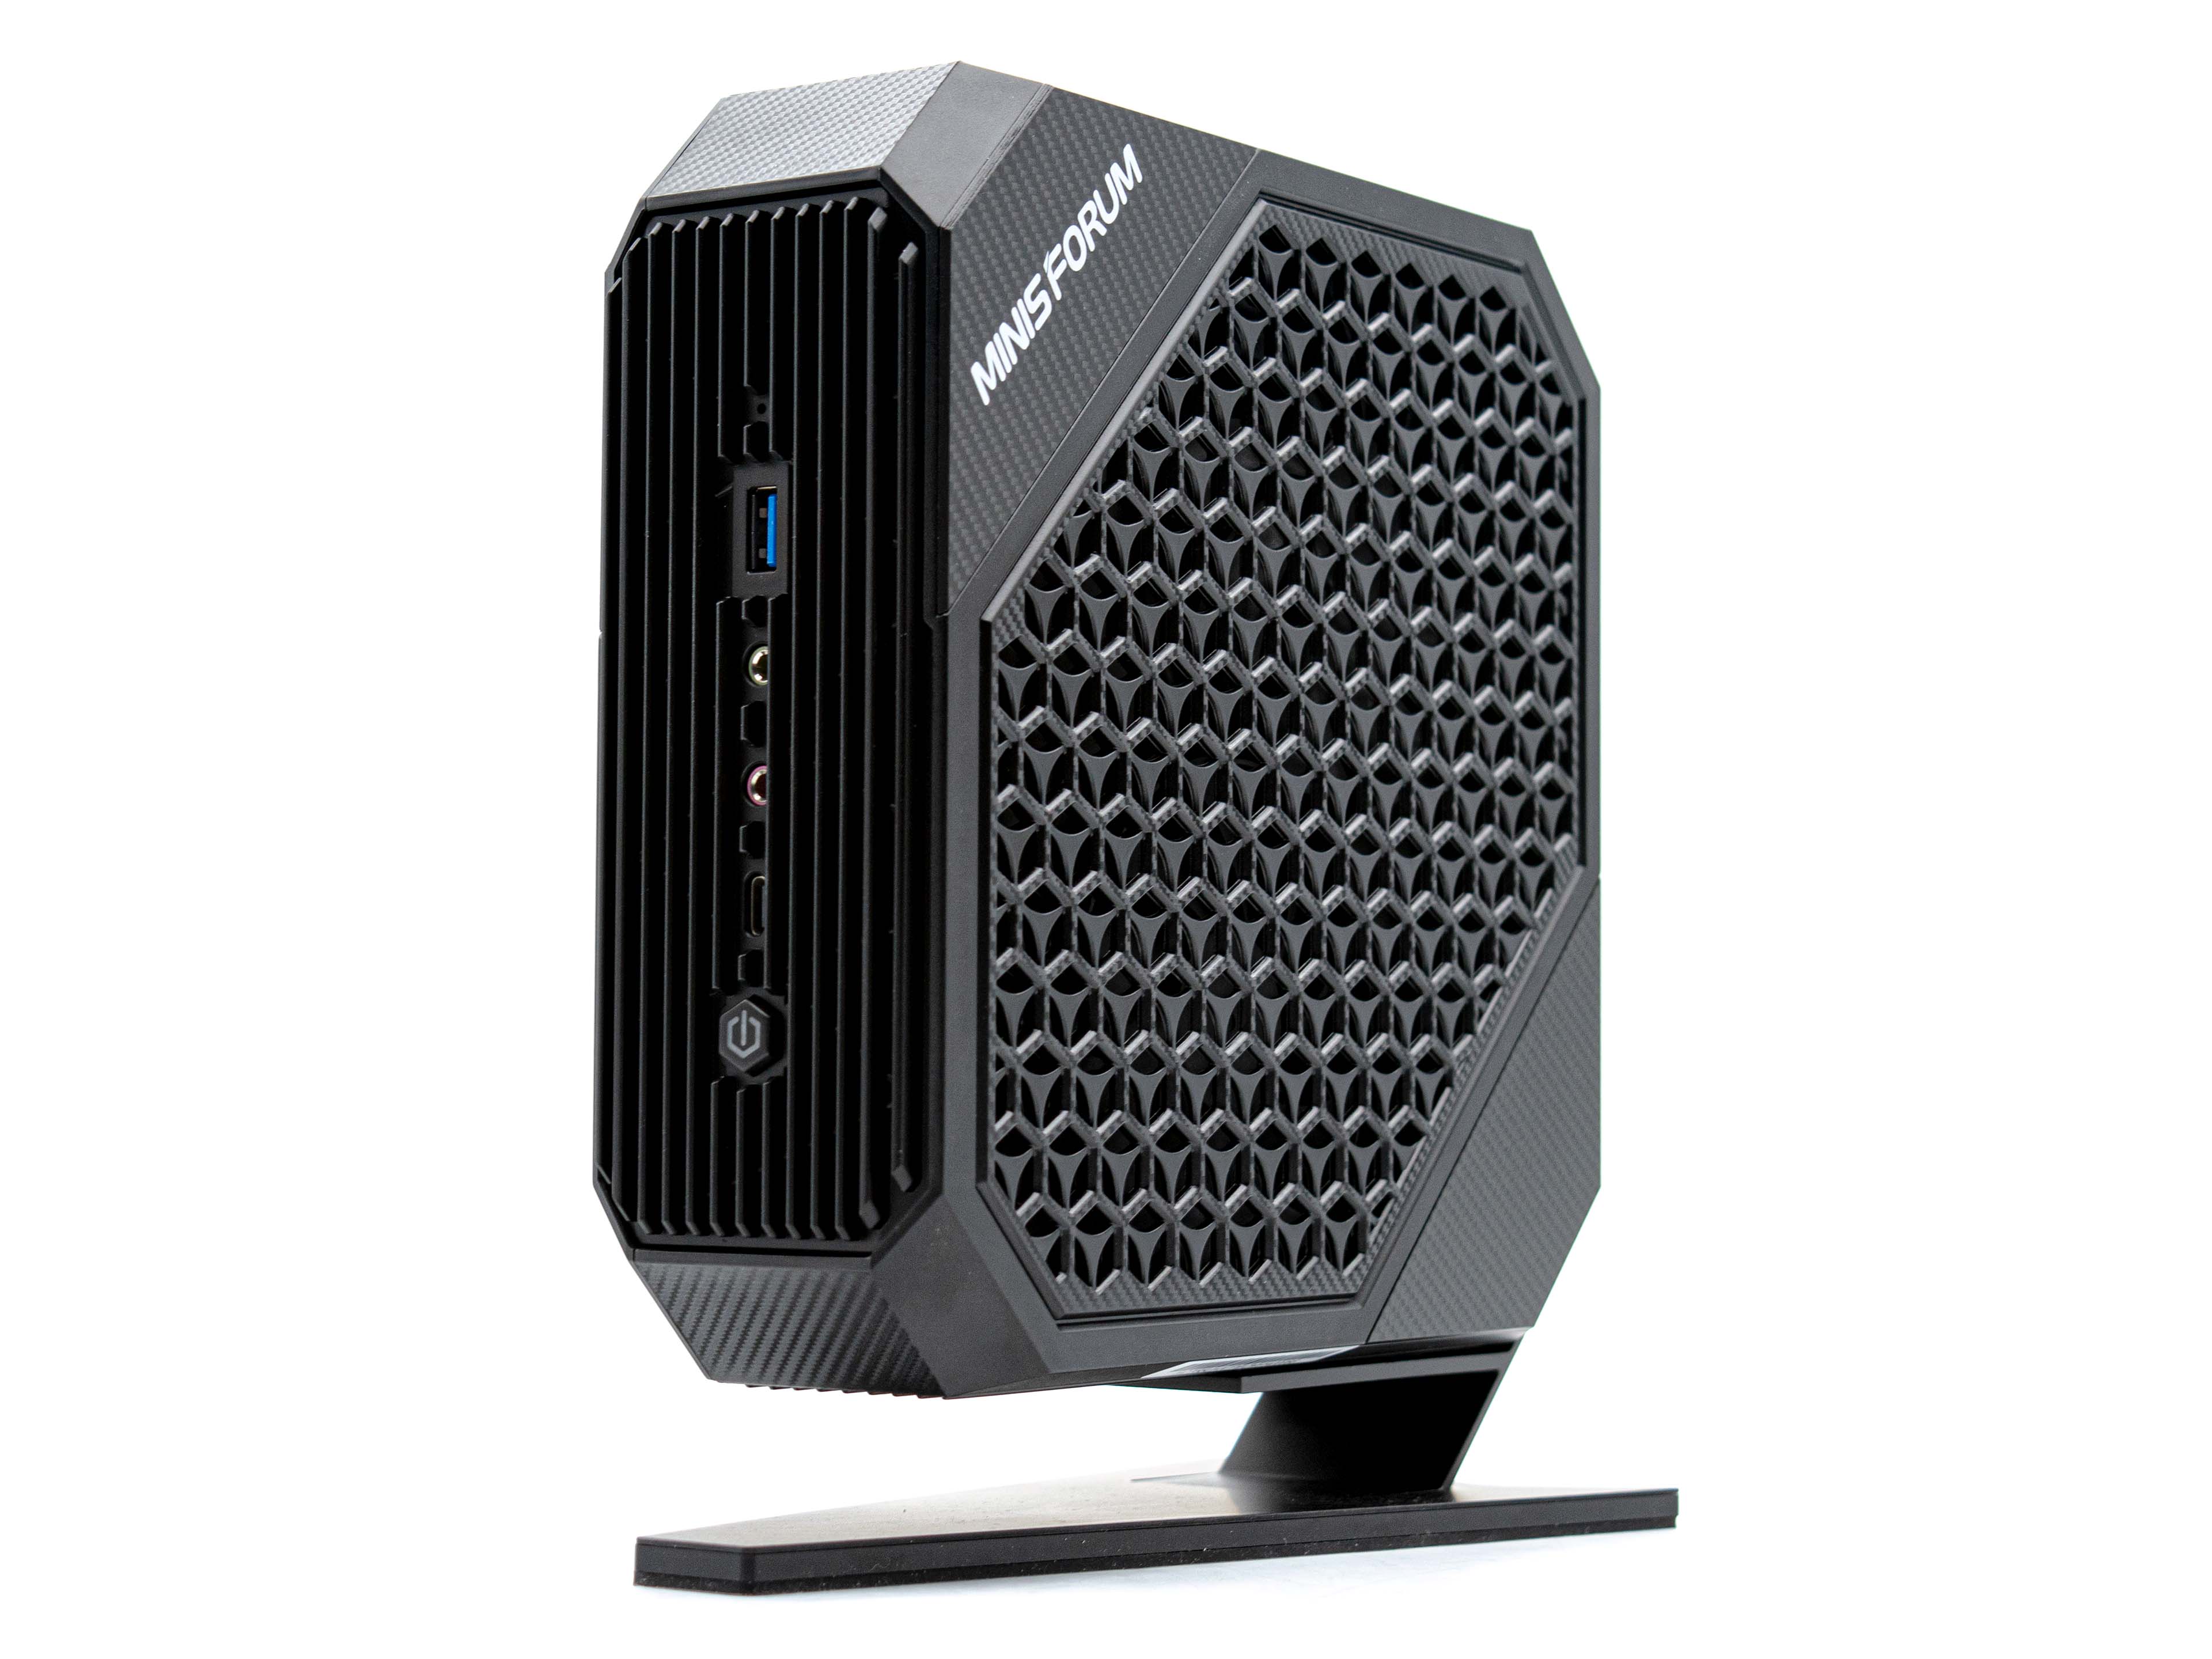 Minisforum Neptune Series HX77G review: The mini gaming PC with an AMD  Ryzen 7 7735HS, AMD Radeon RX 6600M and 2x USB4 -  Reviews